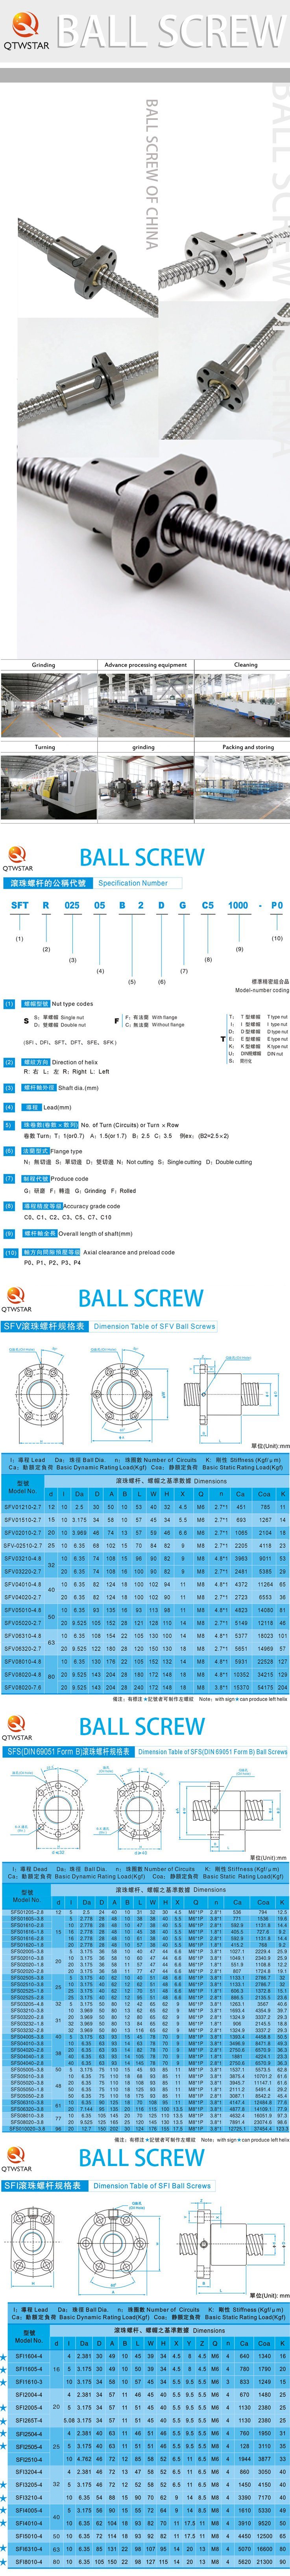 Botswana The Difference Between Ball Screw and Screw, Ball Screw and Ball Screw